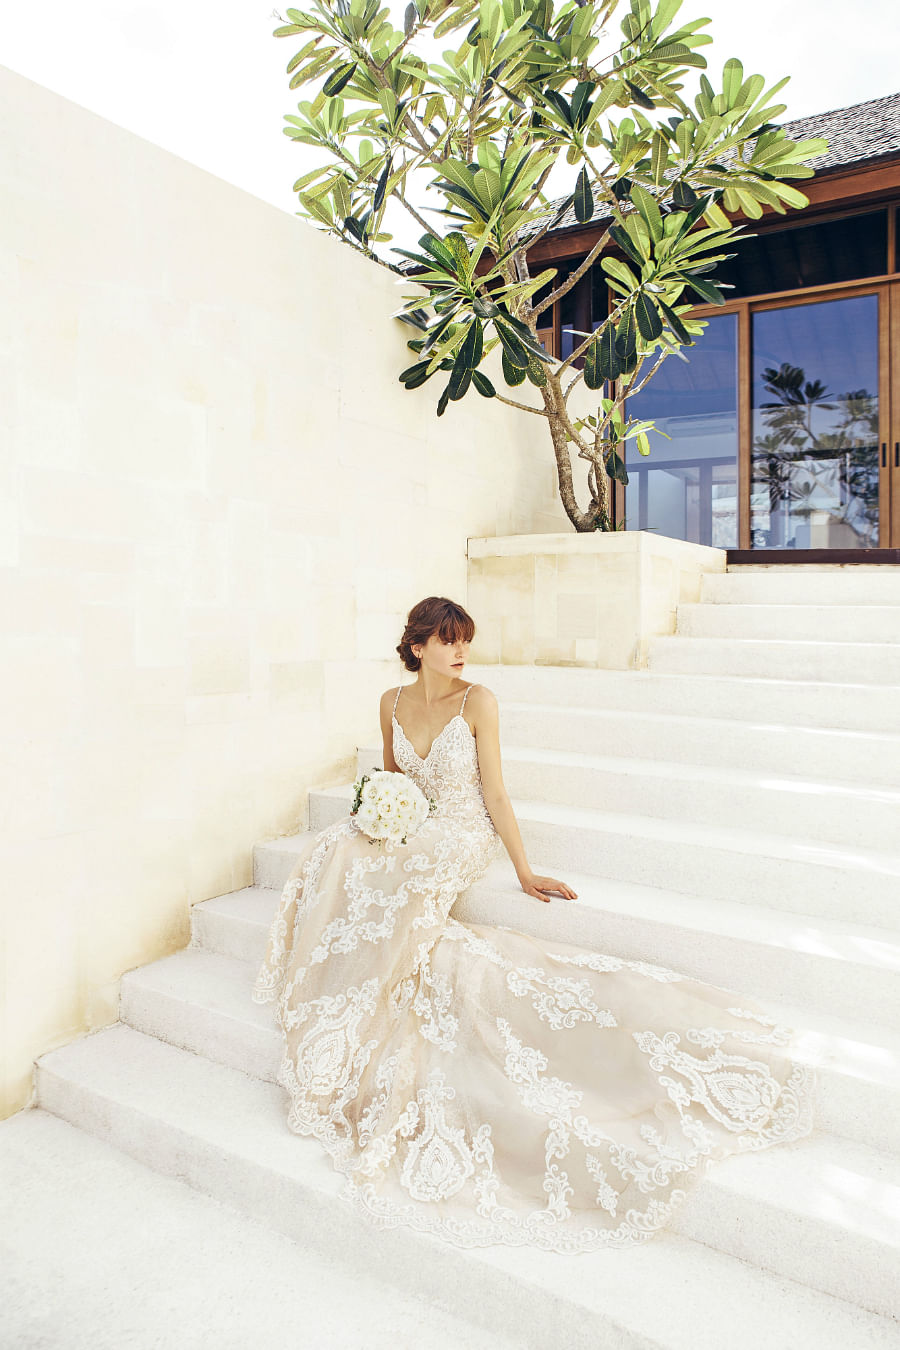 The best wedding dress styles for every body shape - Her World Singapore